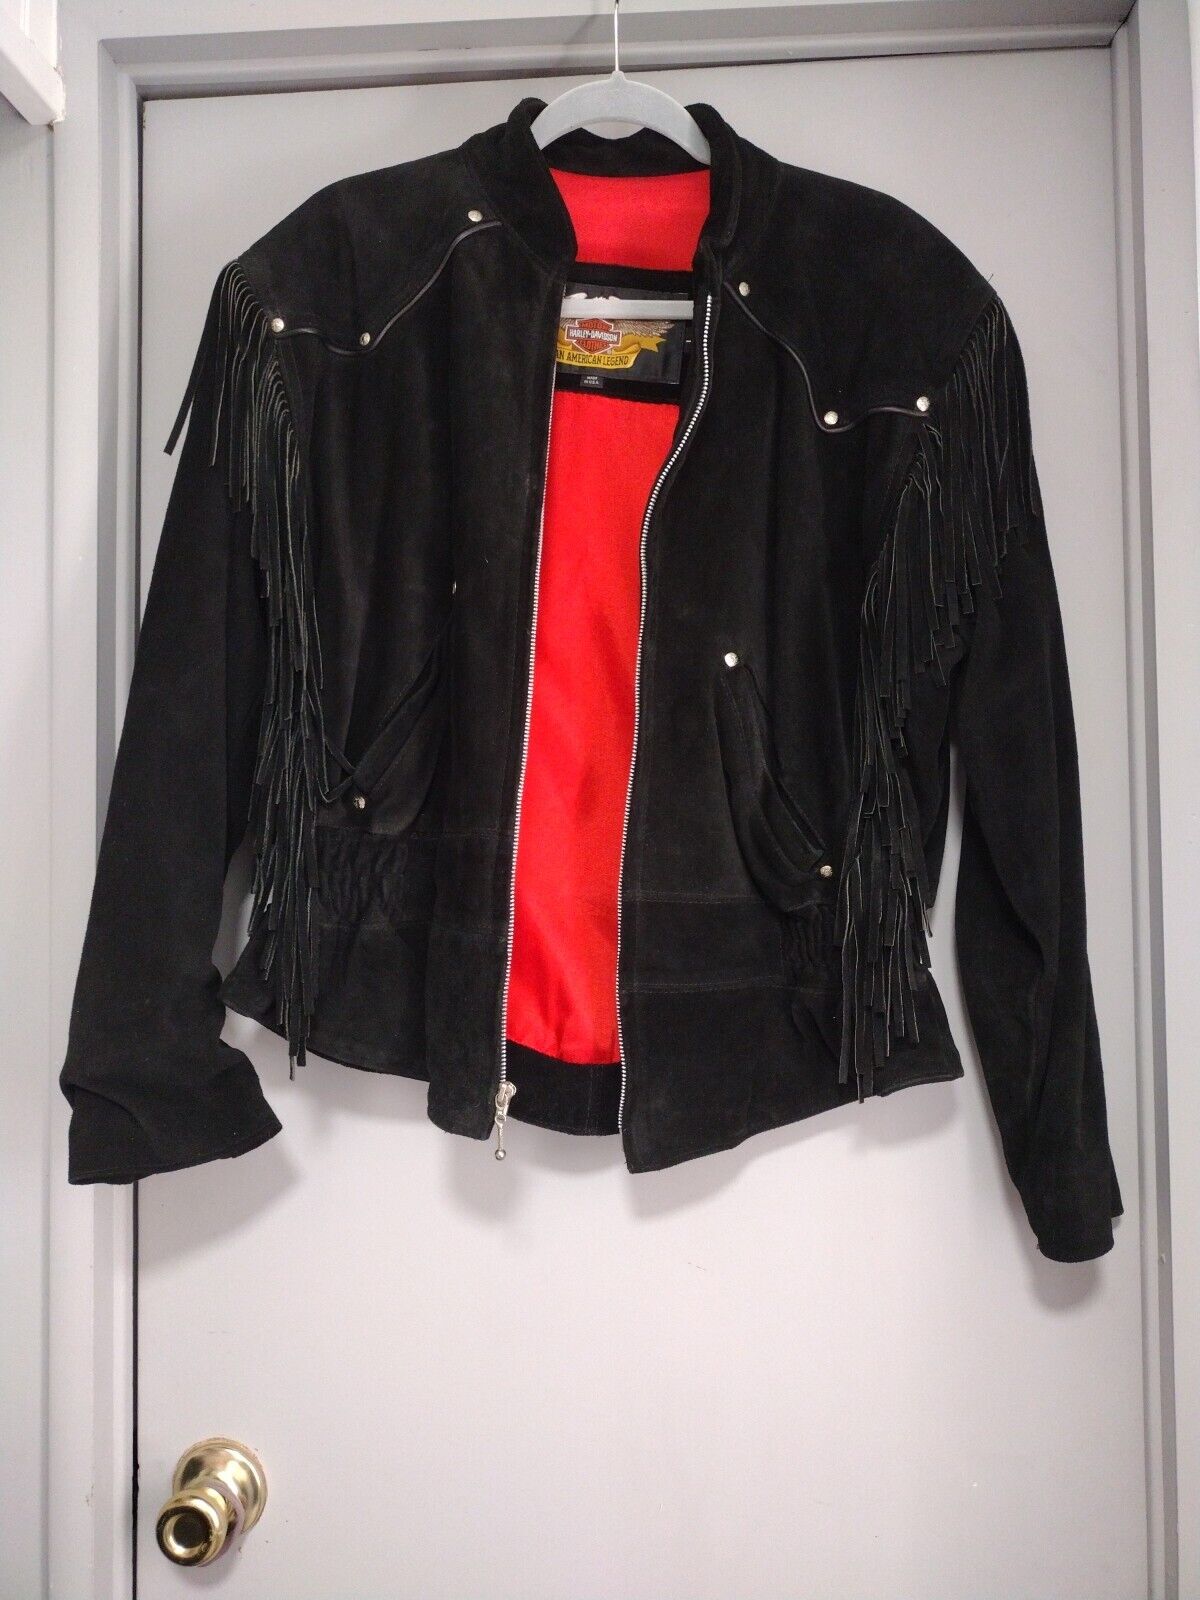 Women\'s Harley Davidson Authentic Suede Fringes Jacket Size L Great  Condition 